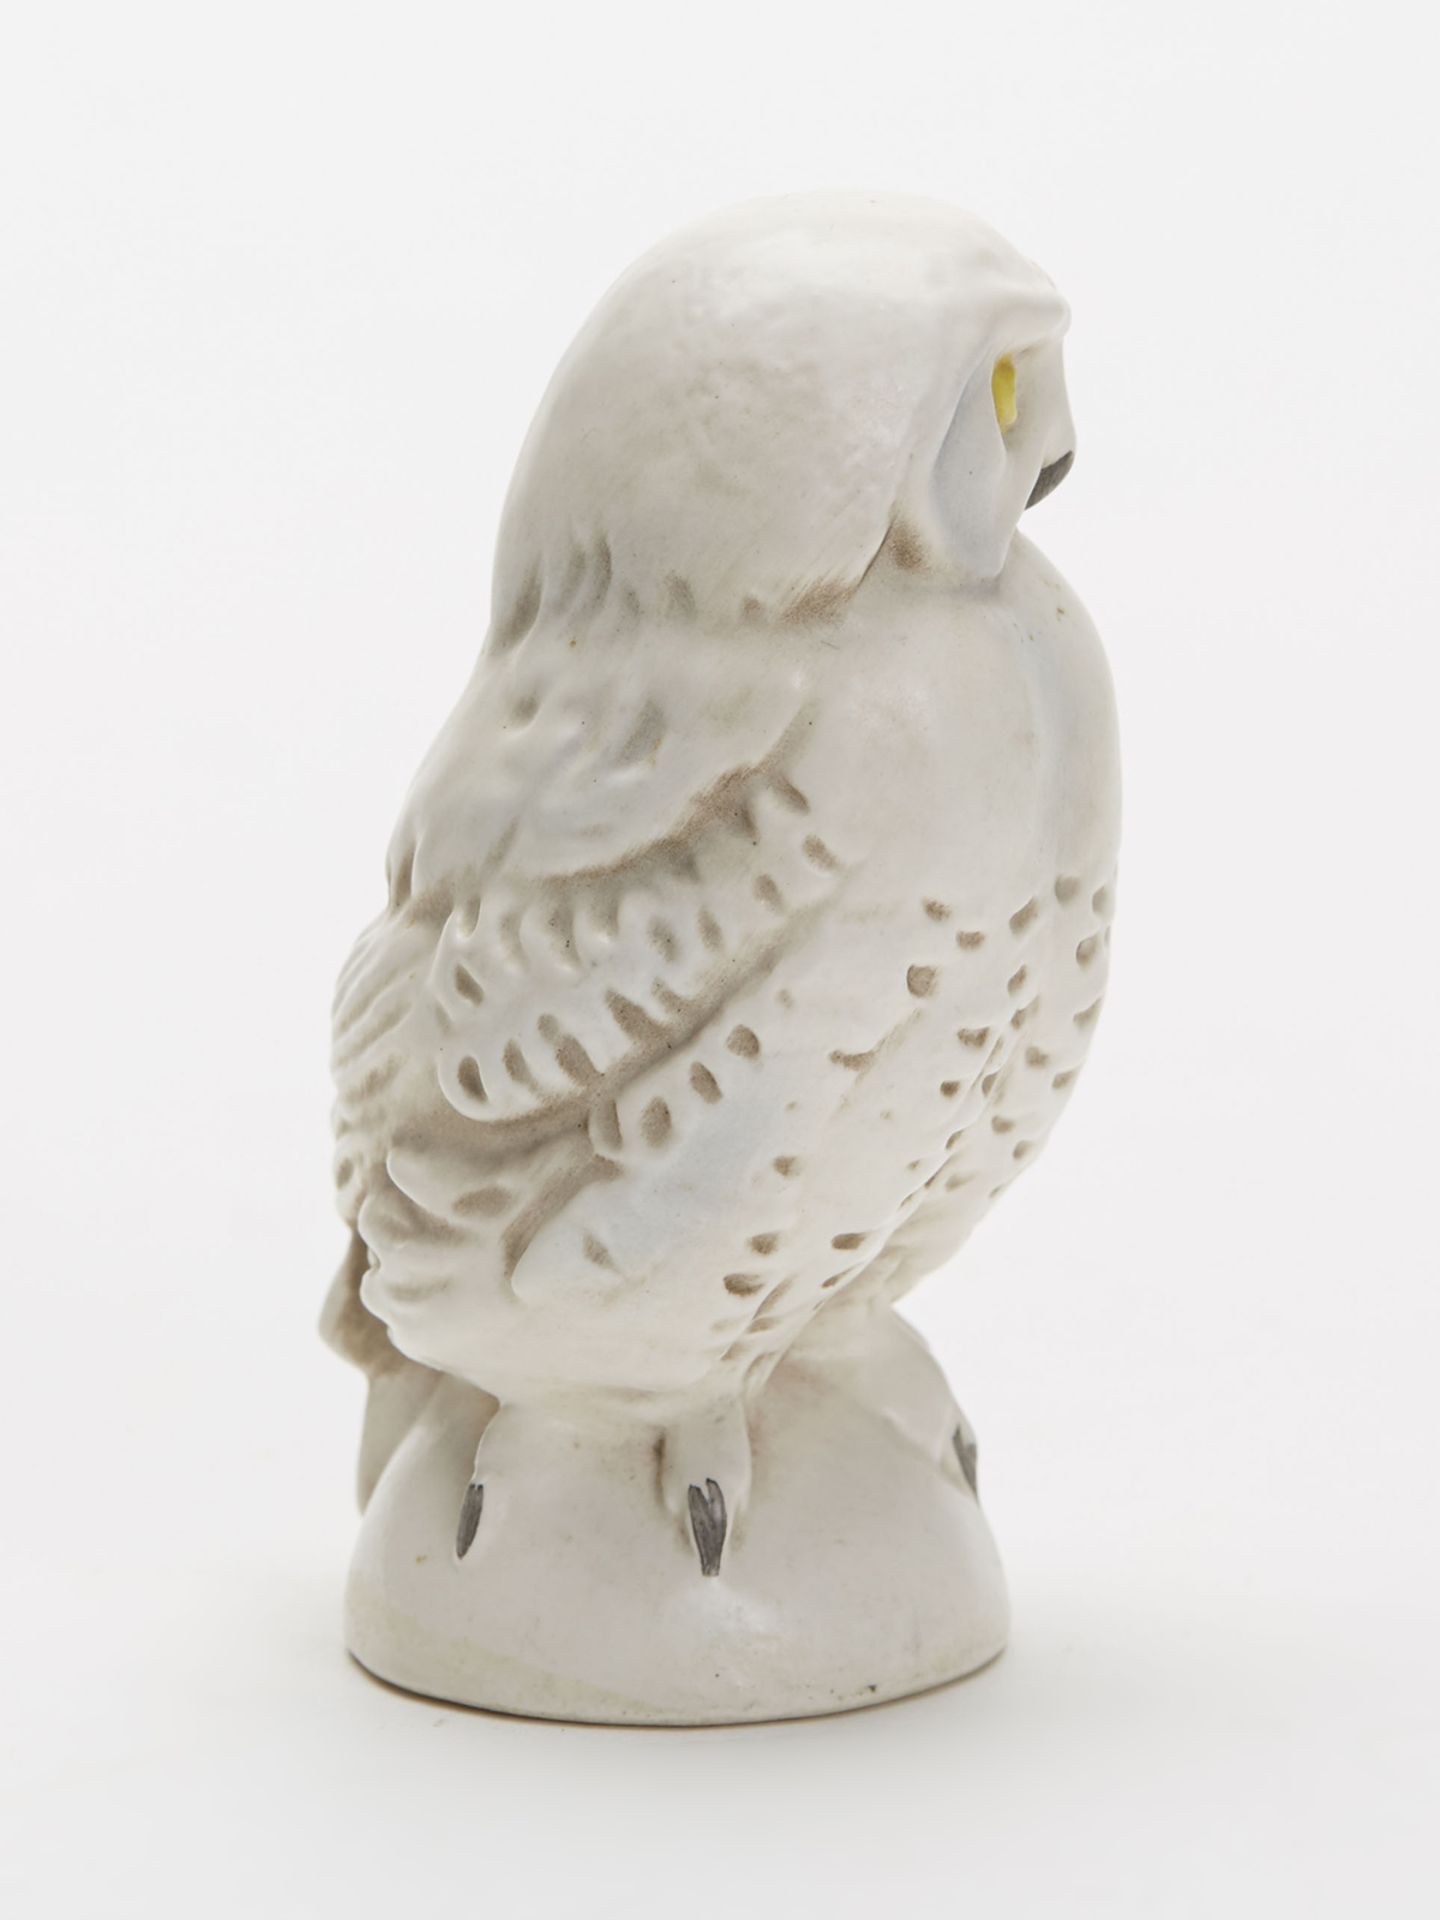 Vintage W Goebel Pottery Figure Of A Snowy Owl 20Th C. - Image 3 of 7